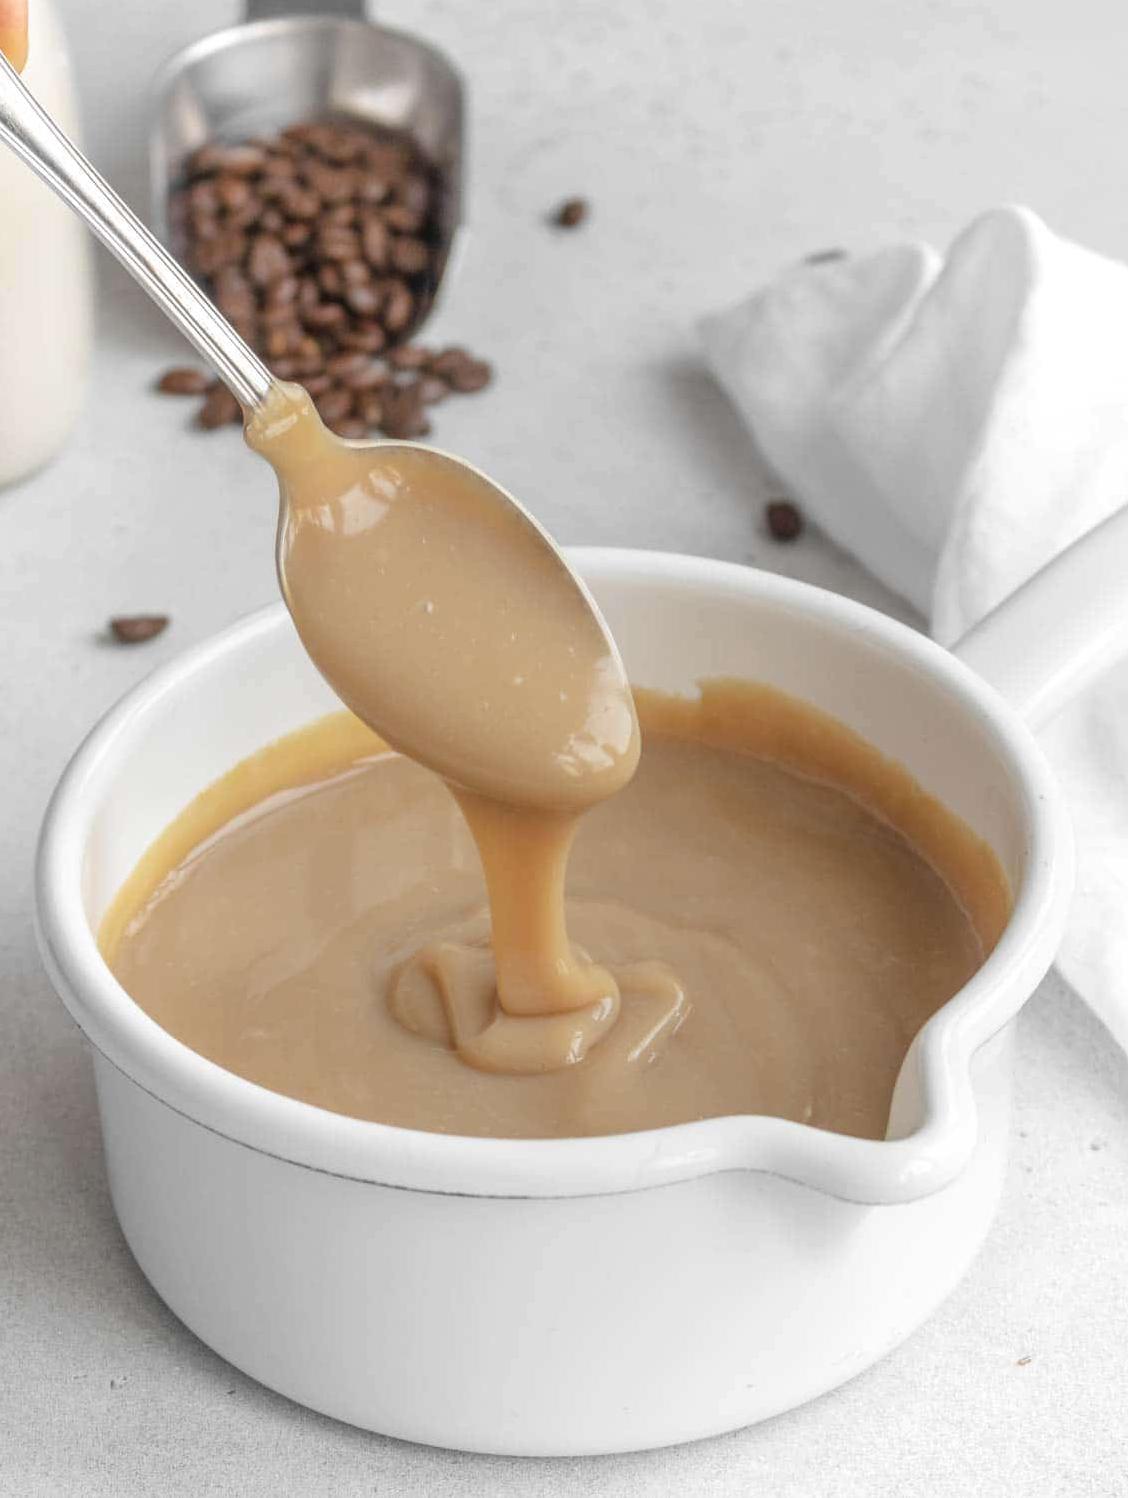  Each spoonful of baked custard with coffee sauce is a decadent treat to indulge in.